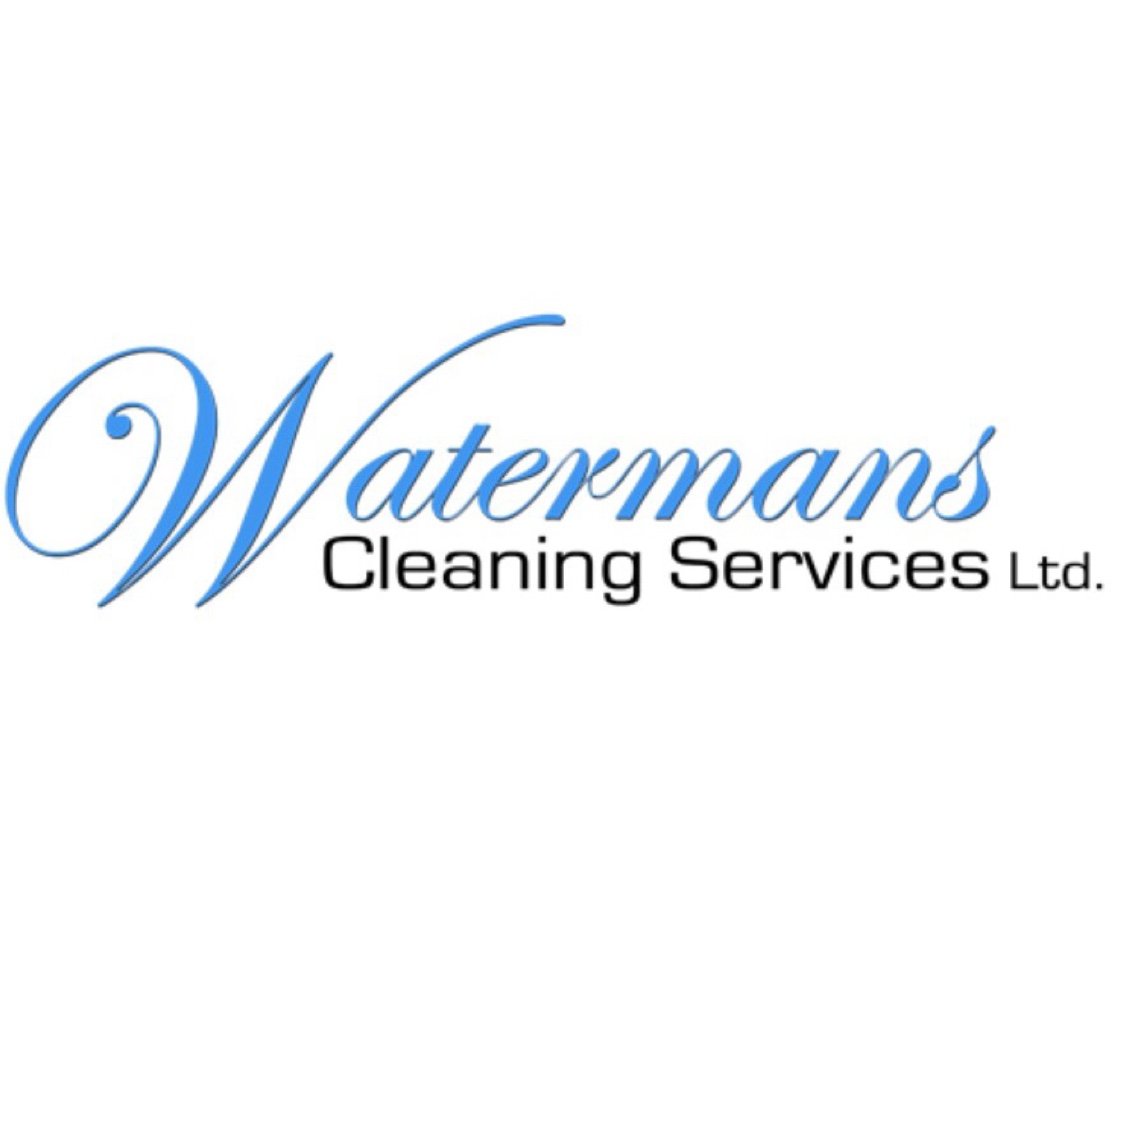 Commercial Cleans. Small rubbish runs. Gardening. Decorating and any odd jobs paulwaterman67@hotmail.co.uk